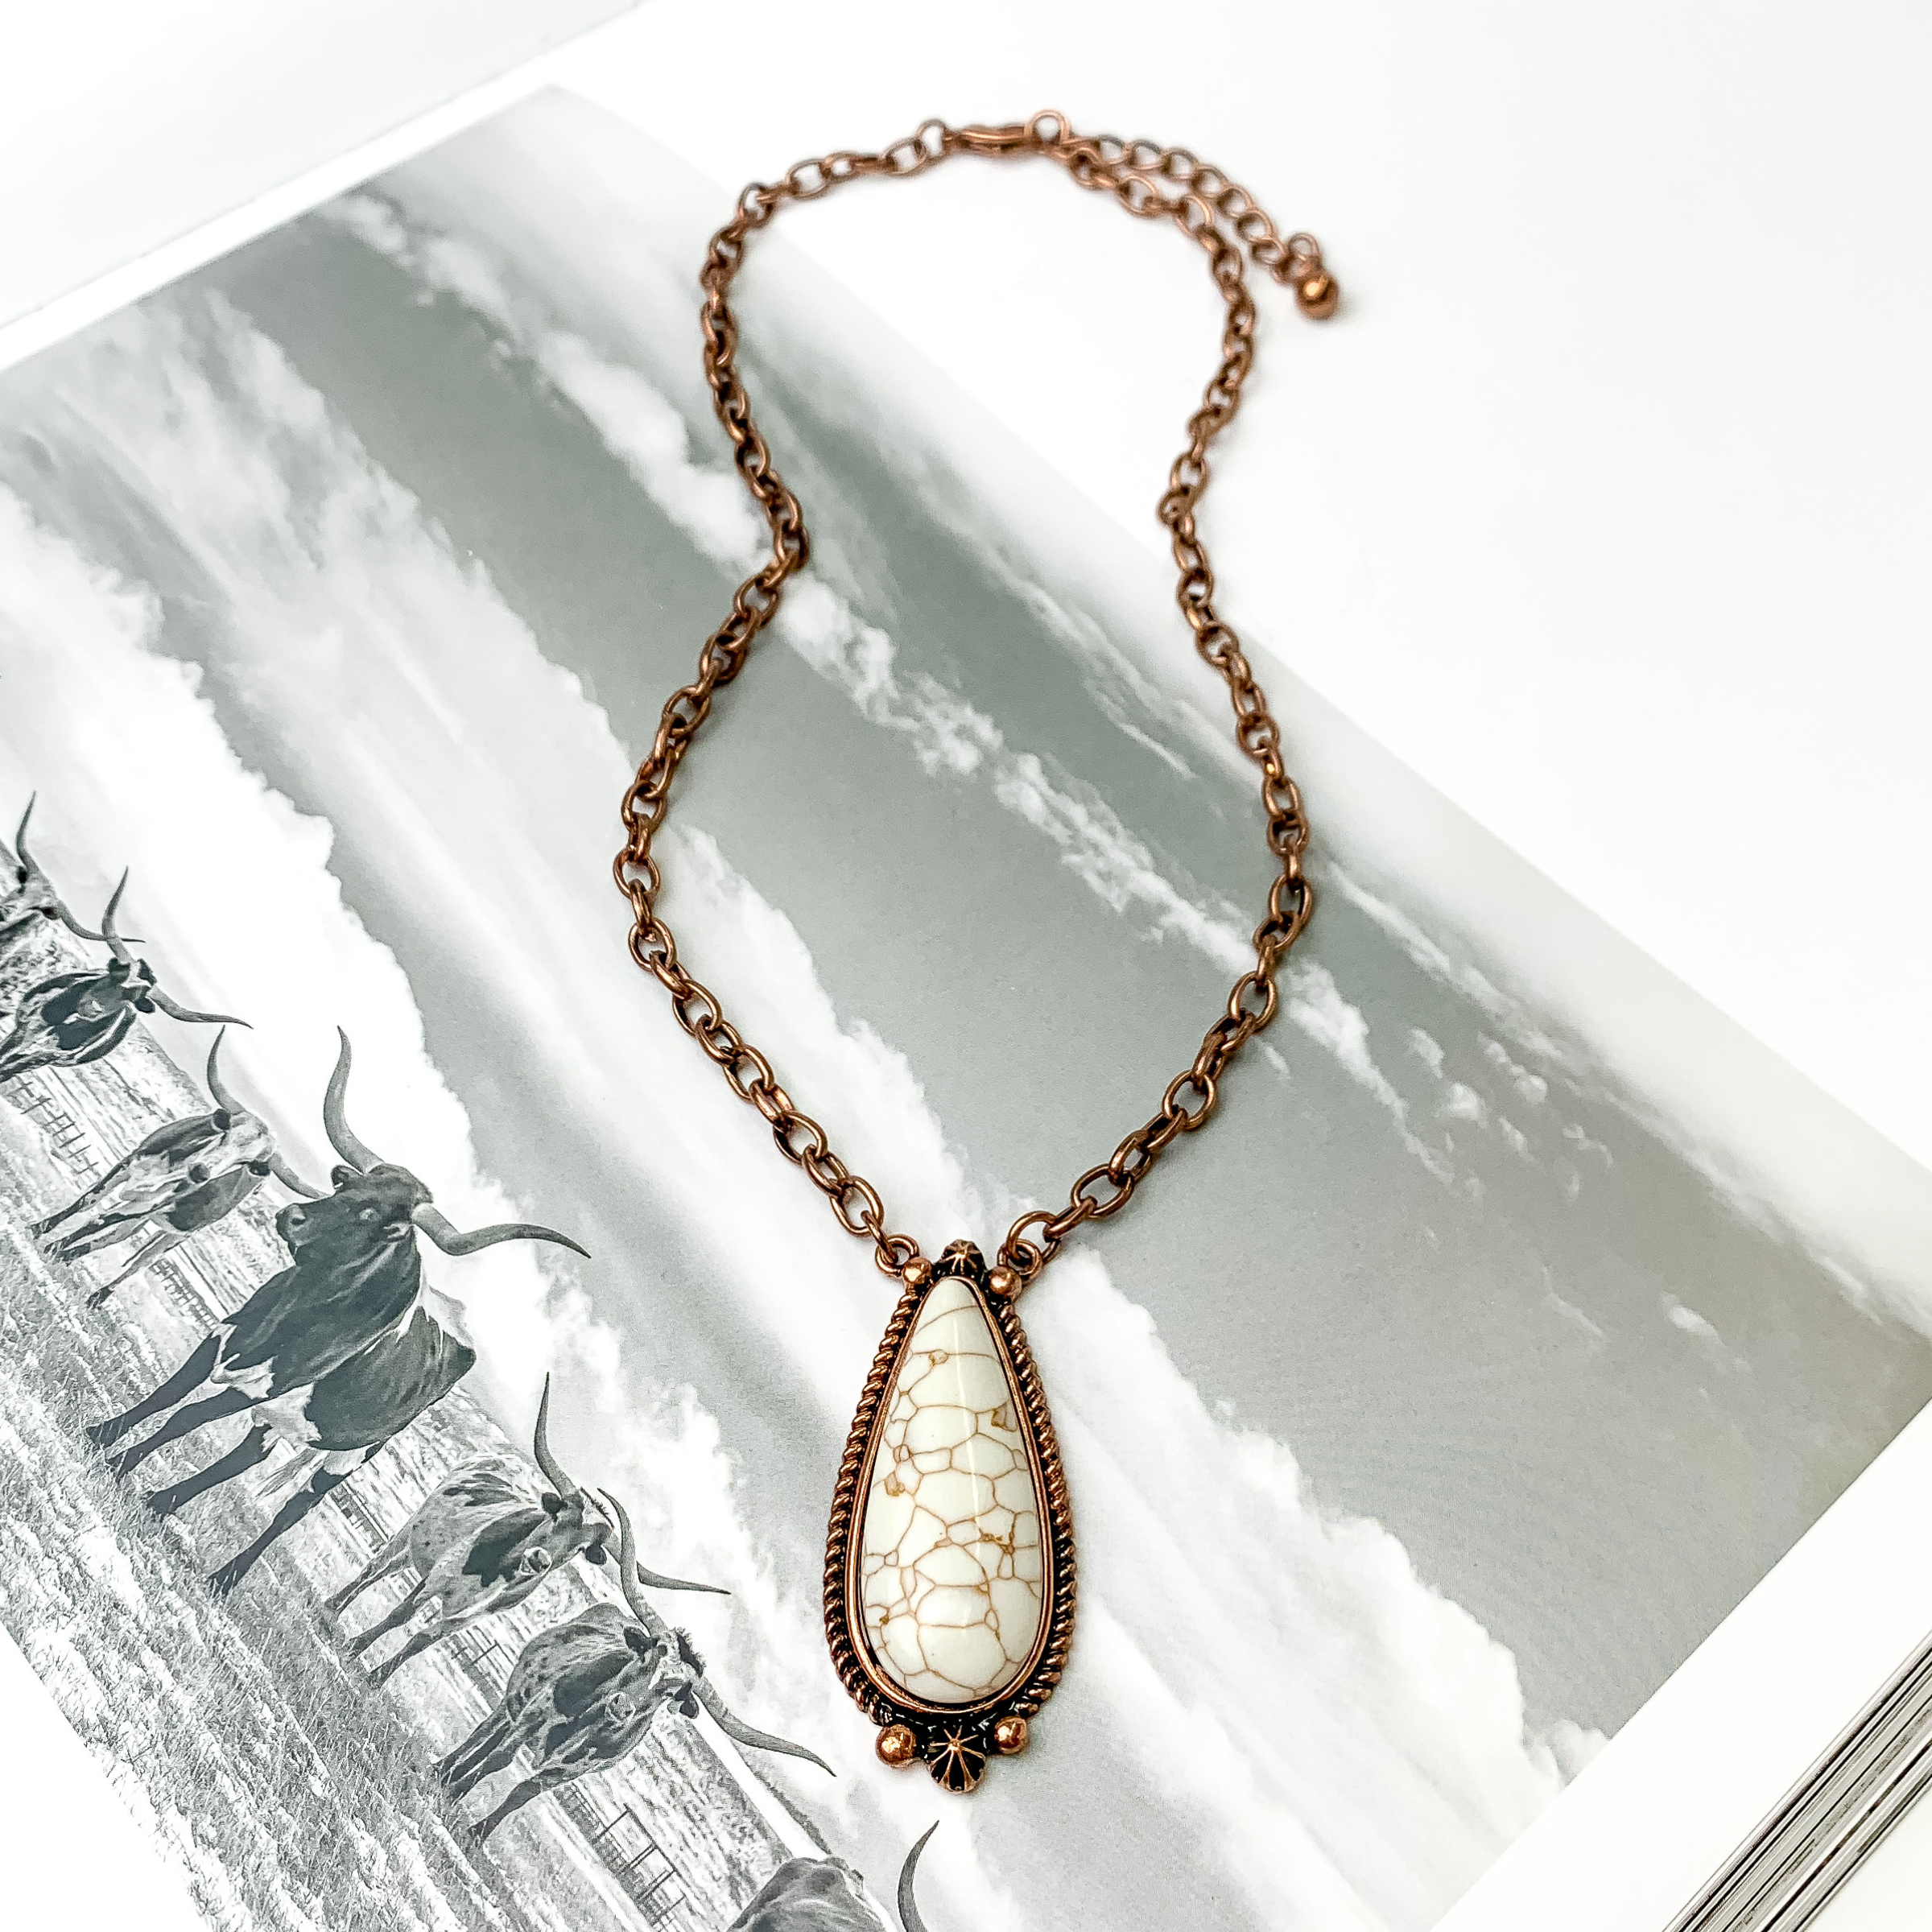 Copper chain necklace with ivory, teardrop stone. The stone also has a copper outline. This necklace is pictured on an open black and white western picture book.